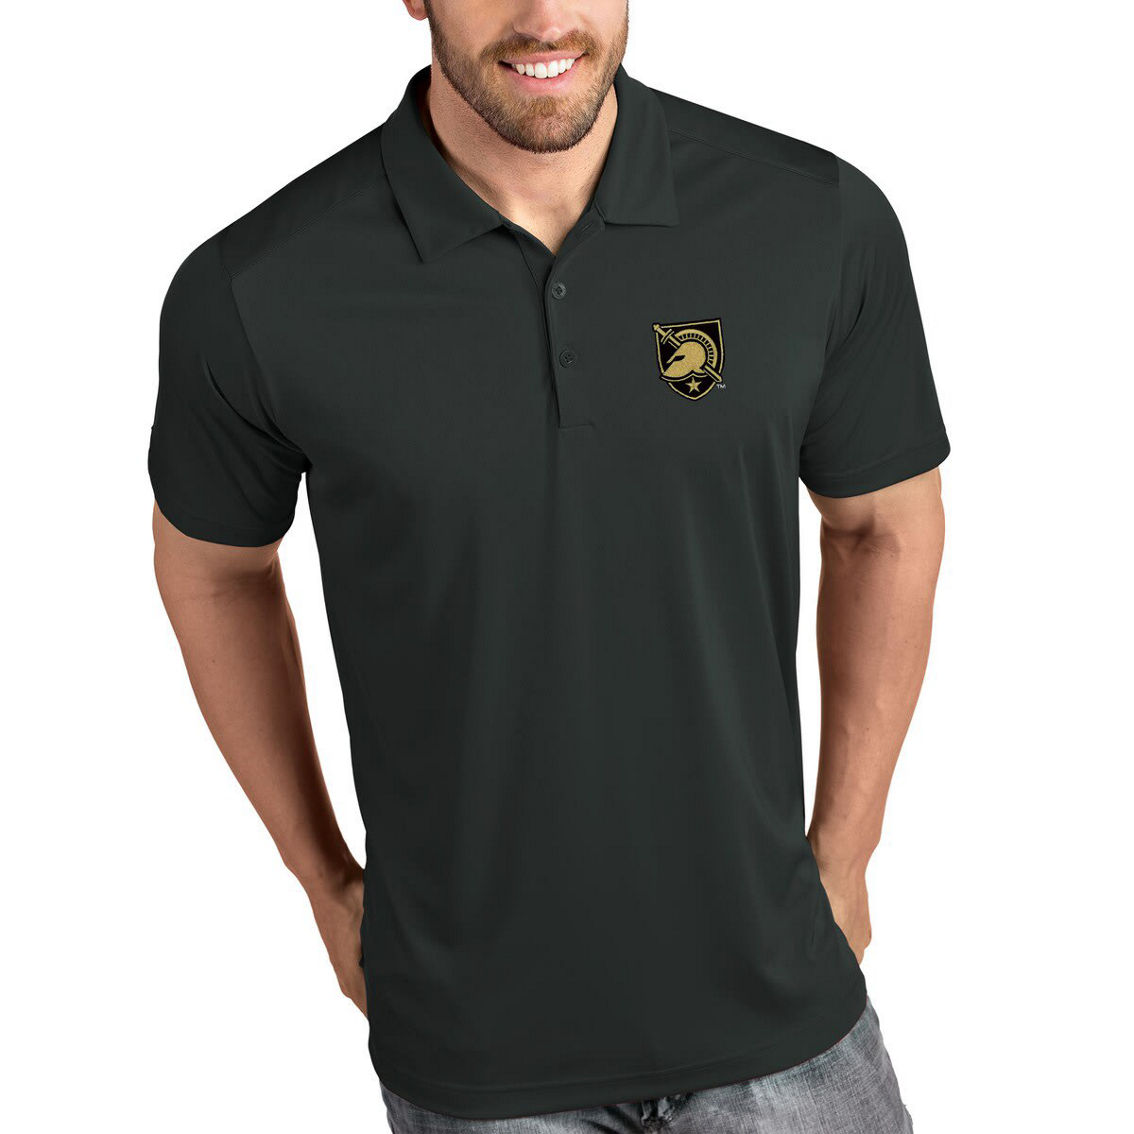 Antigua Army Black Knights Tribute Polo - Charcoal - Image 2 of 2